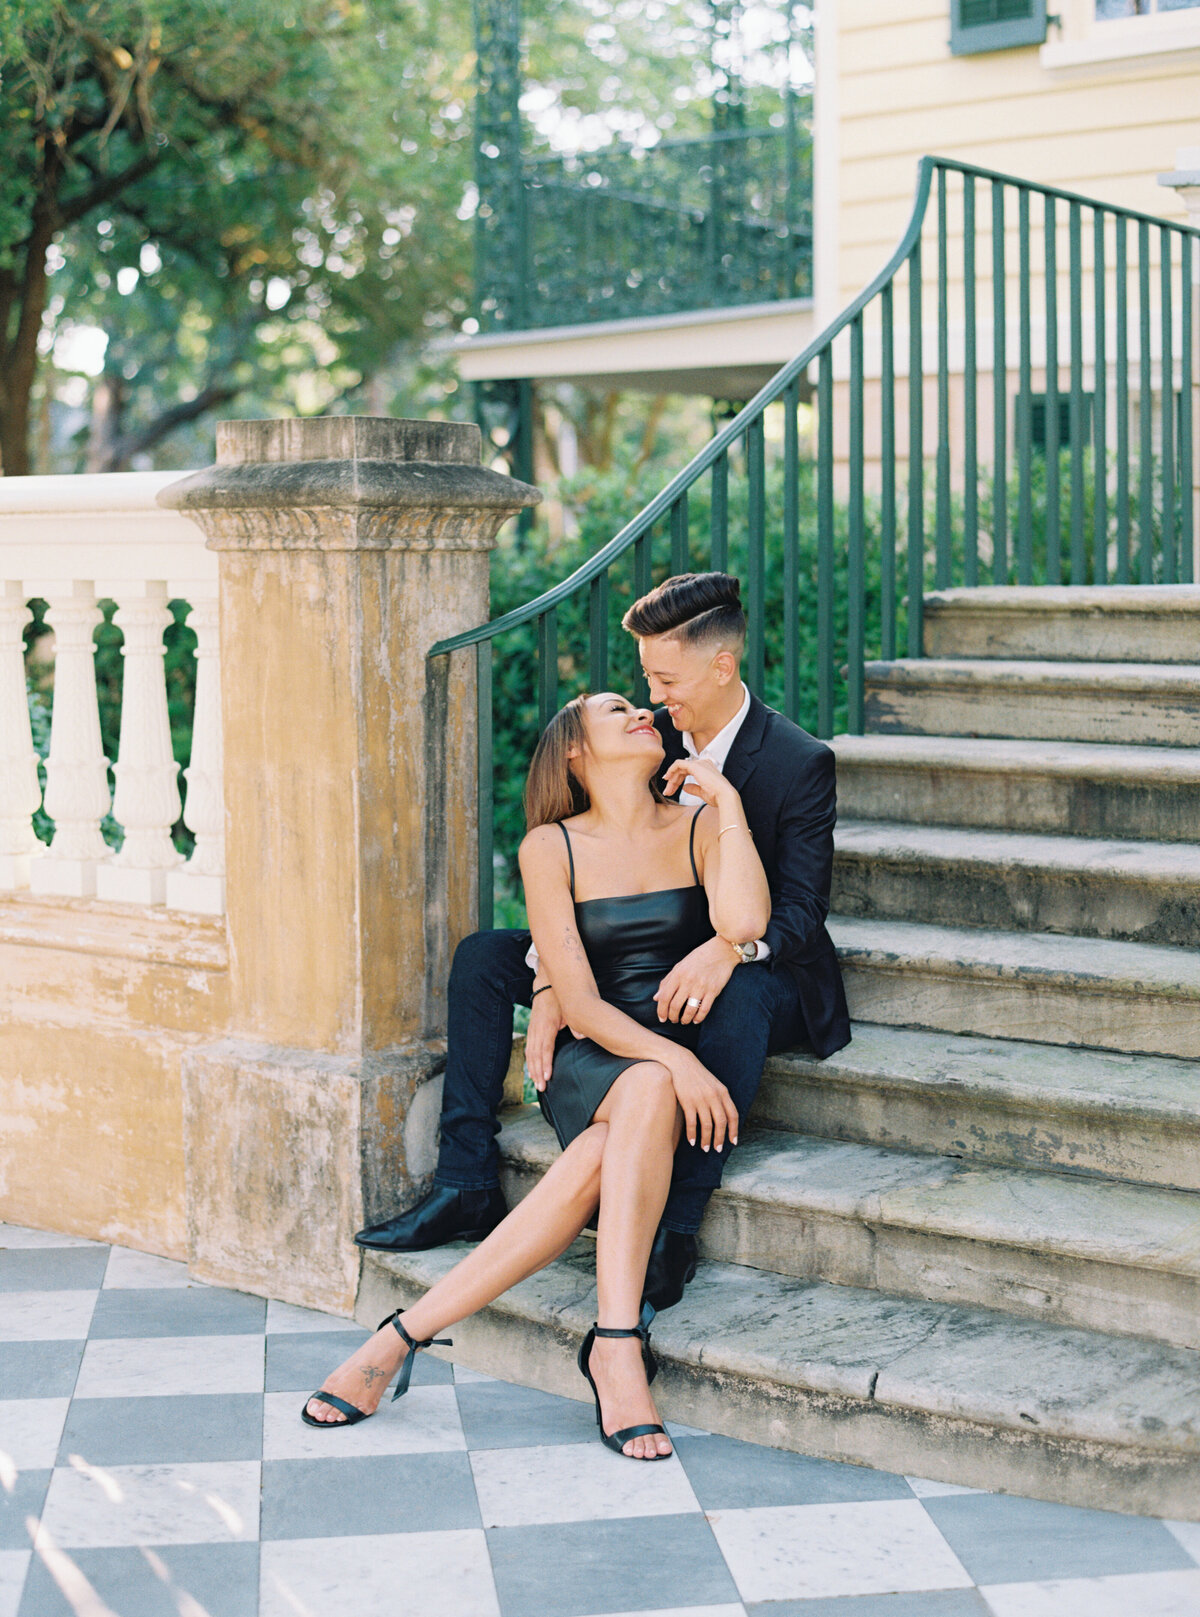 Inclusive wedding photographer based in Charleston, SC. Couple sitting on steps laughing at each other.  Chic and stylish black outfits at sunset engagement session. Charleston film photographer.